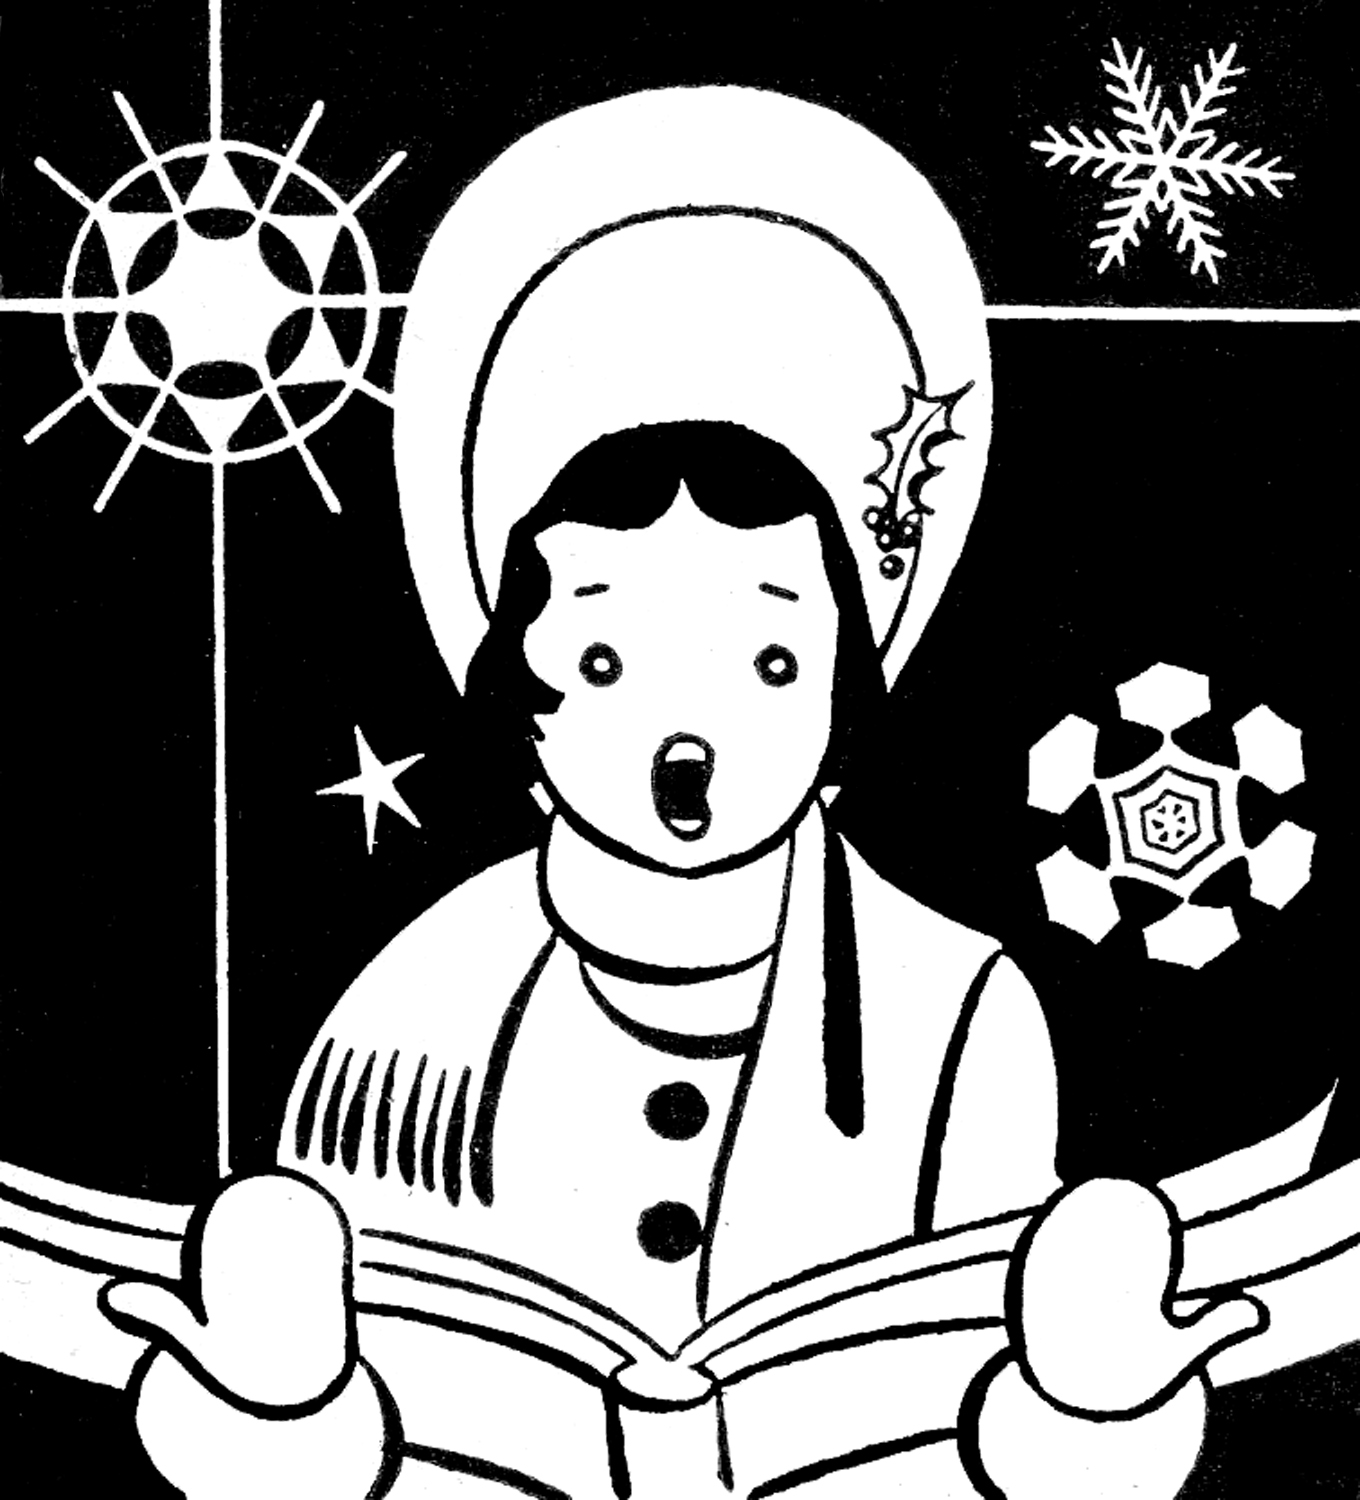 12 Retro Black And White Christmas Clipart The Graphics Fairy